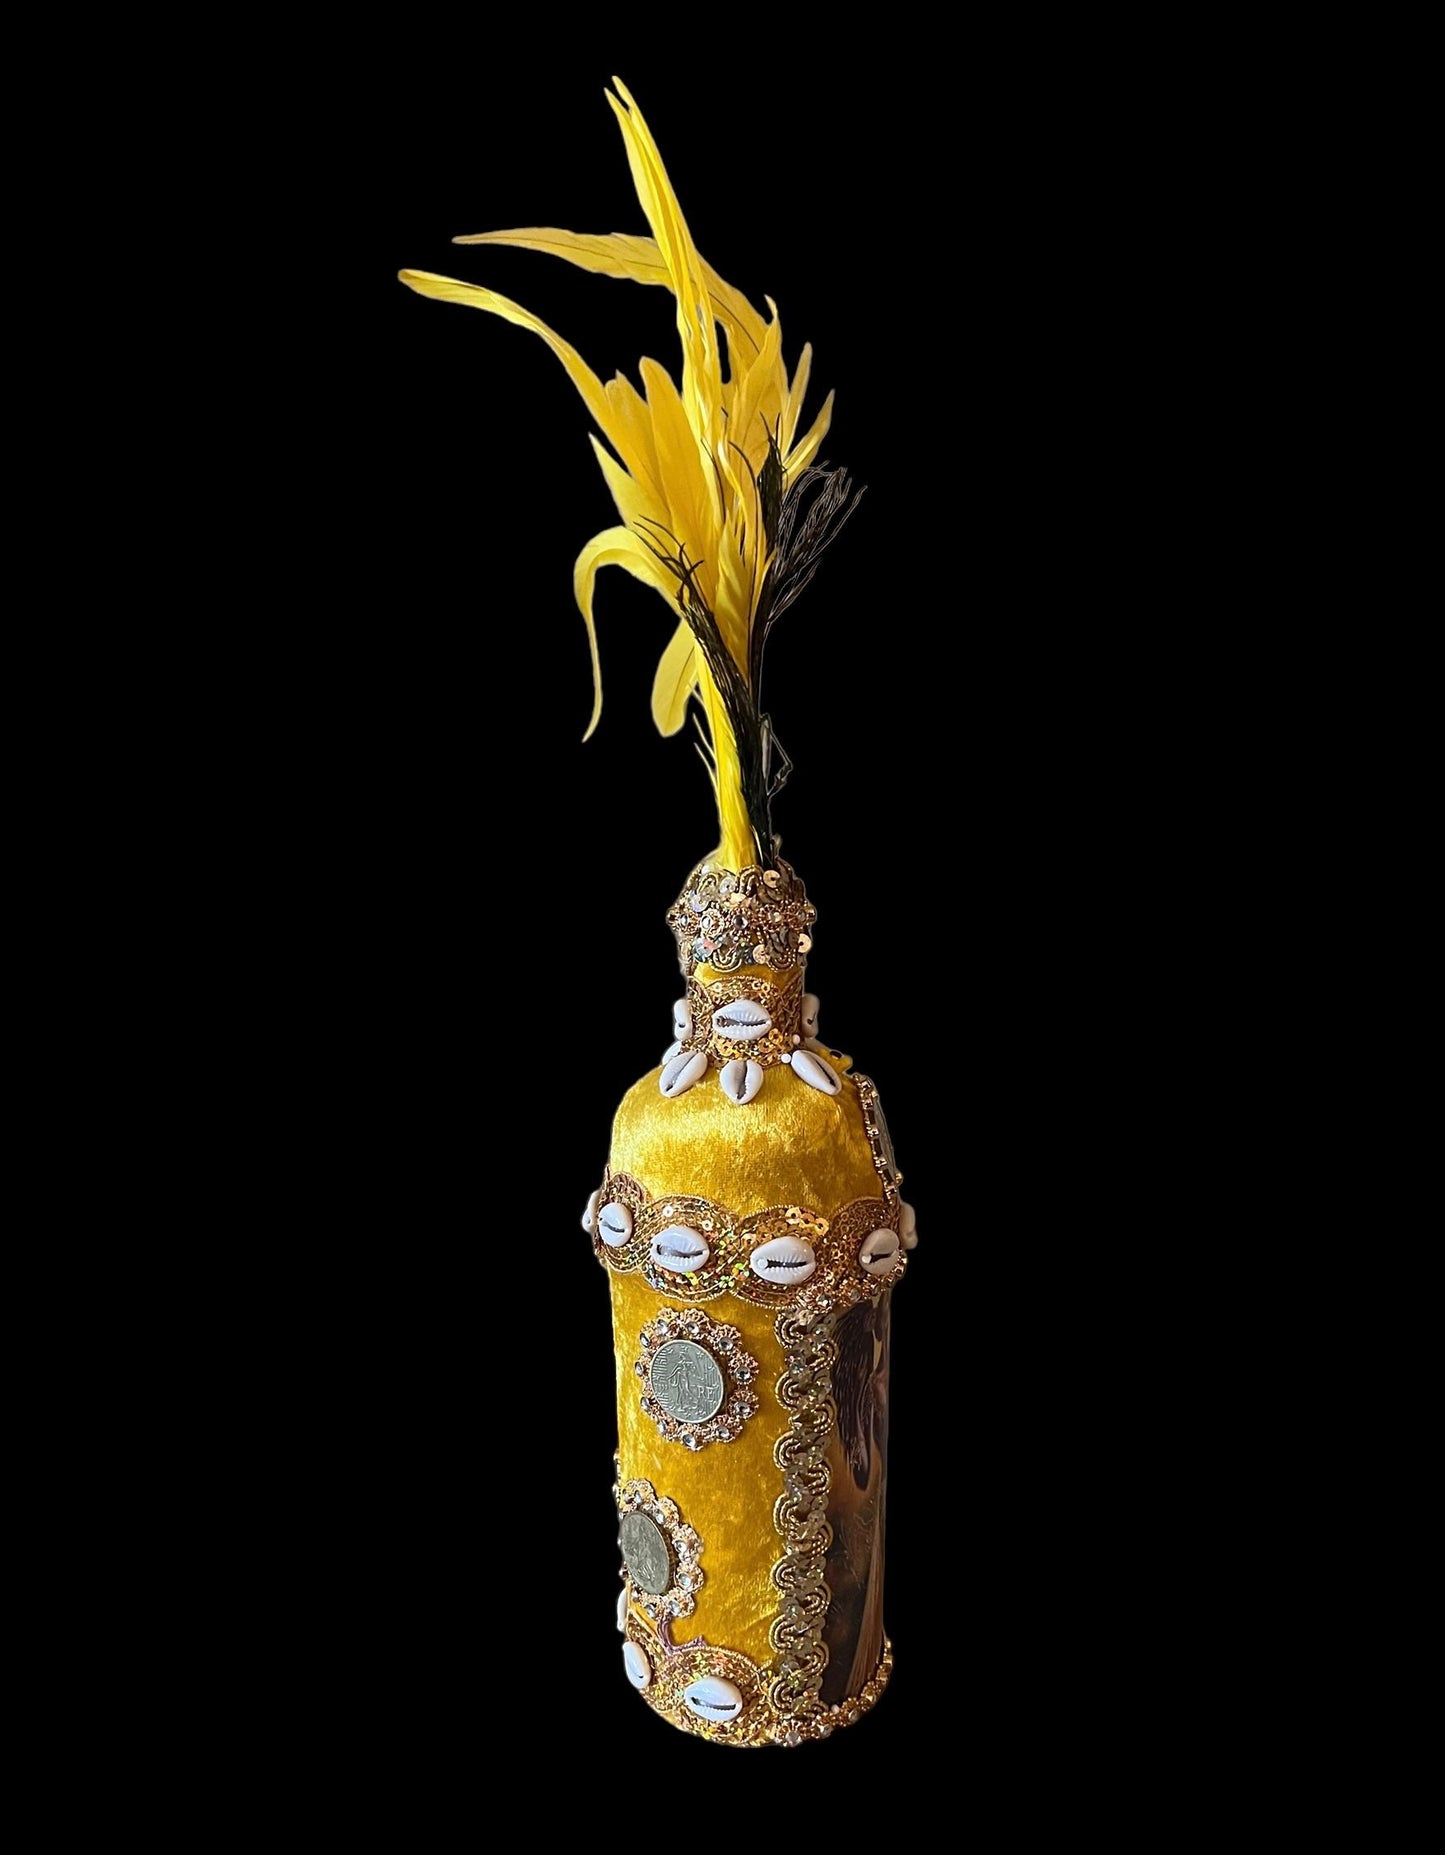 Oshun Boutey / Bottle + Blessed + Made by Lukumi & Haitian Vodou Initiate + Spiritual Art + One of a Kind